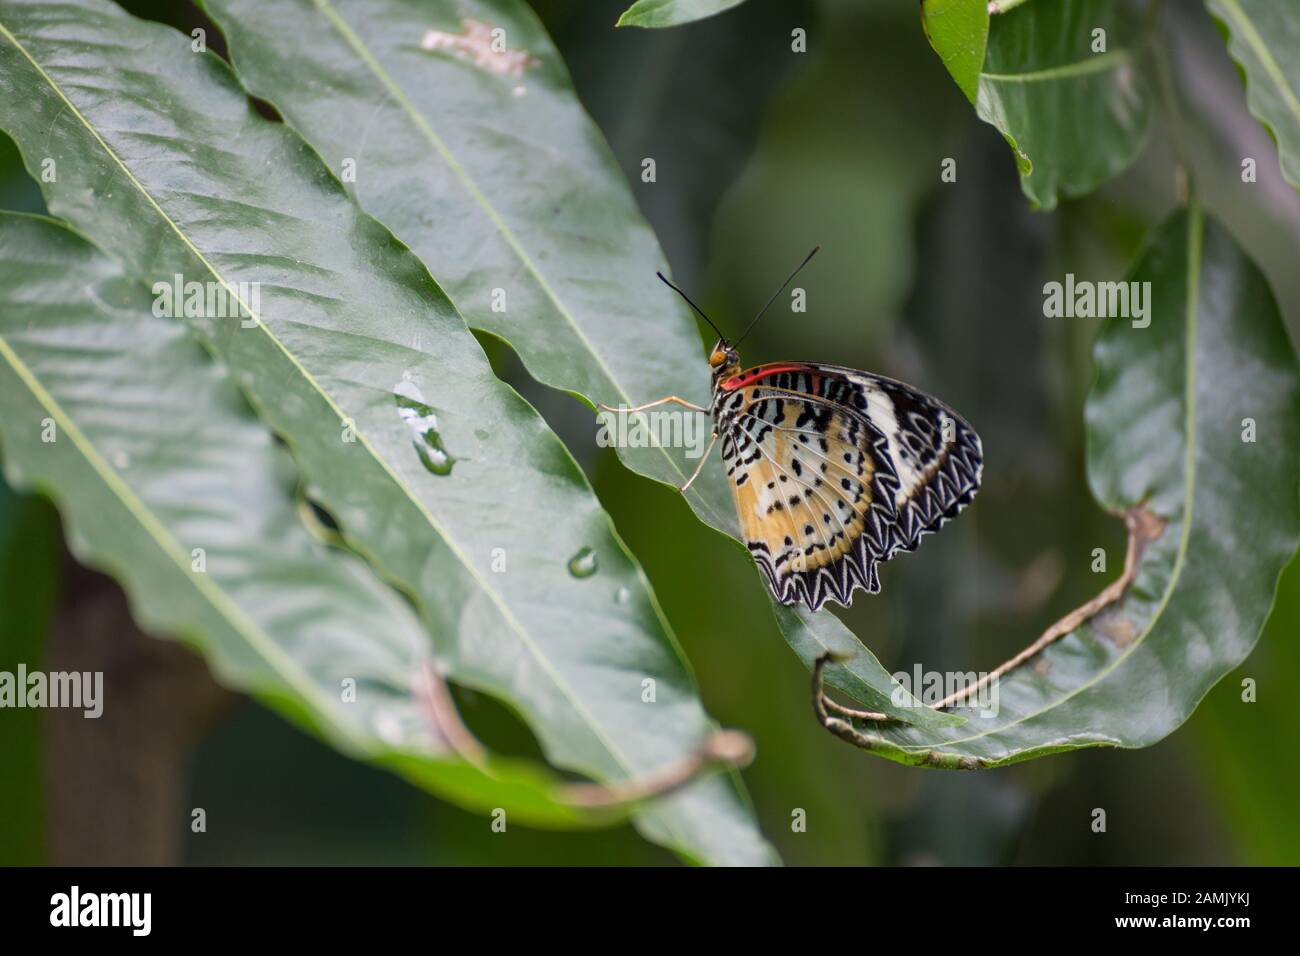 Motley butterfly on a leaf Stock Photo